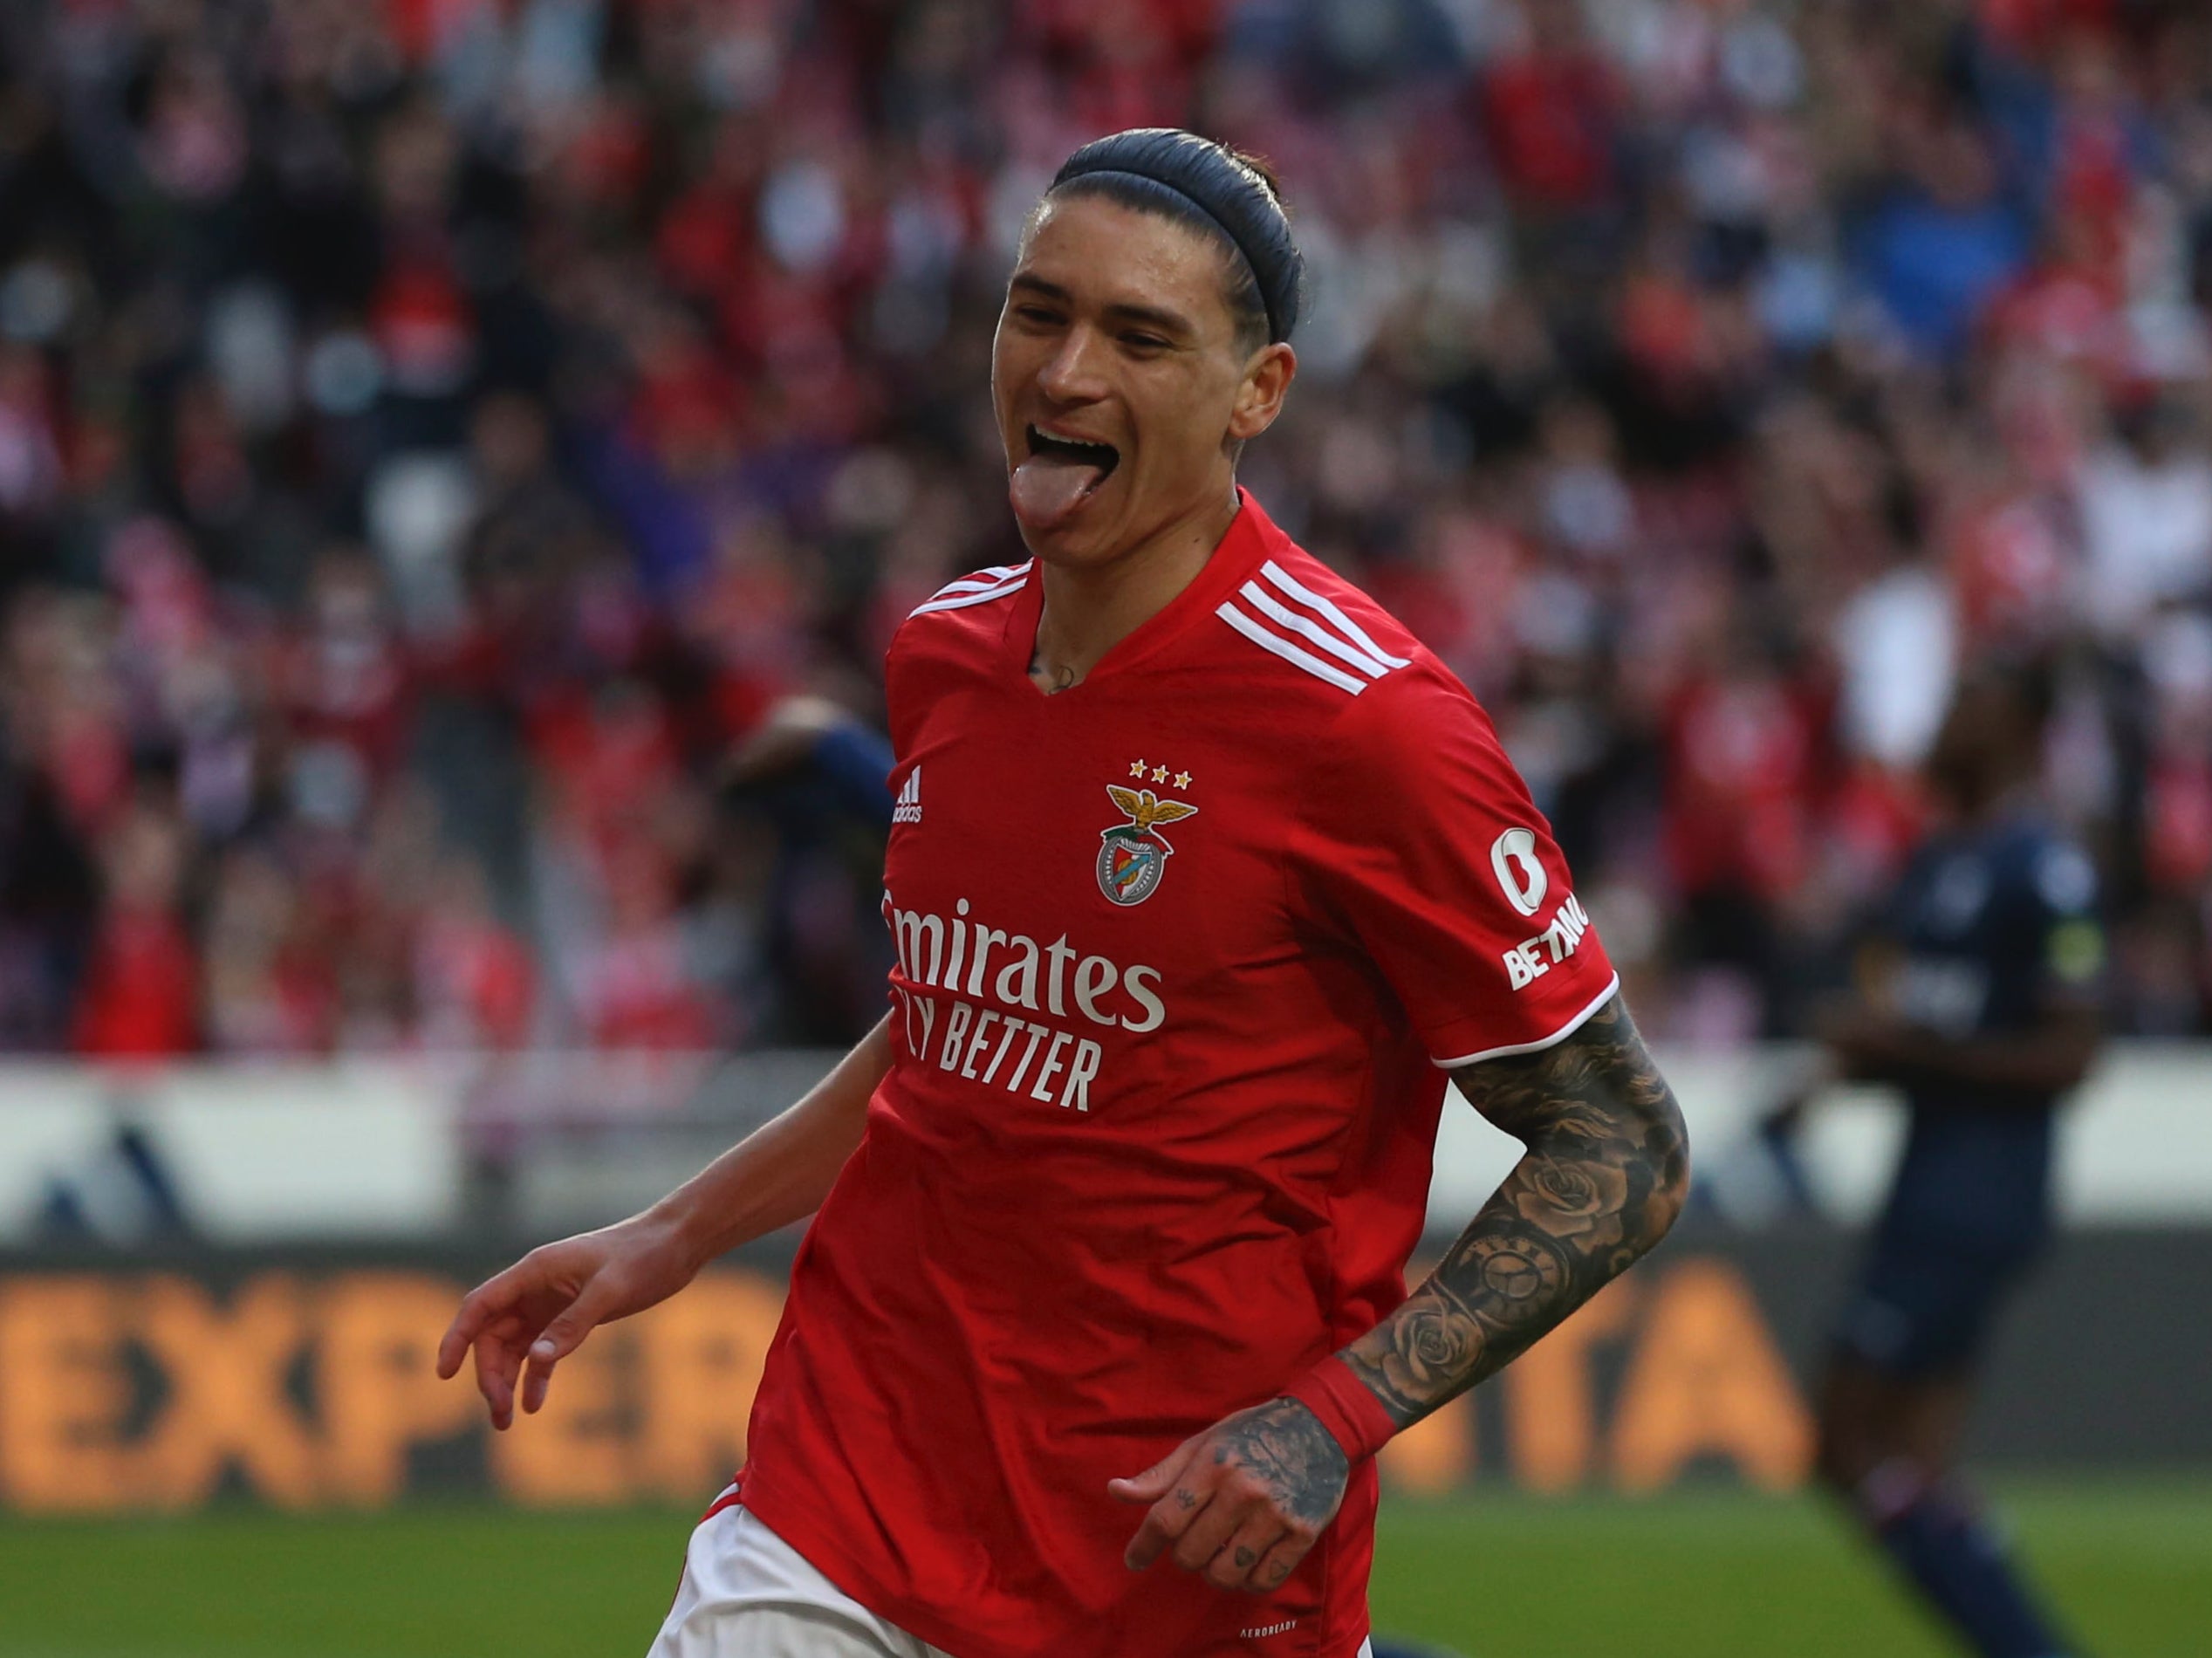 Liverpool are keen to sign Darwin Nunez from Benfica